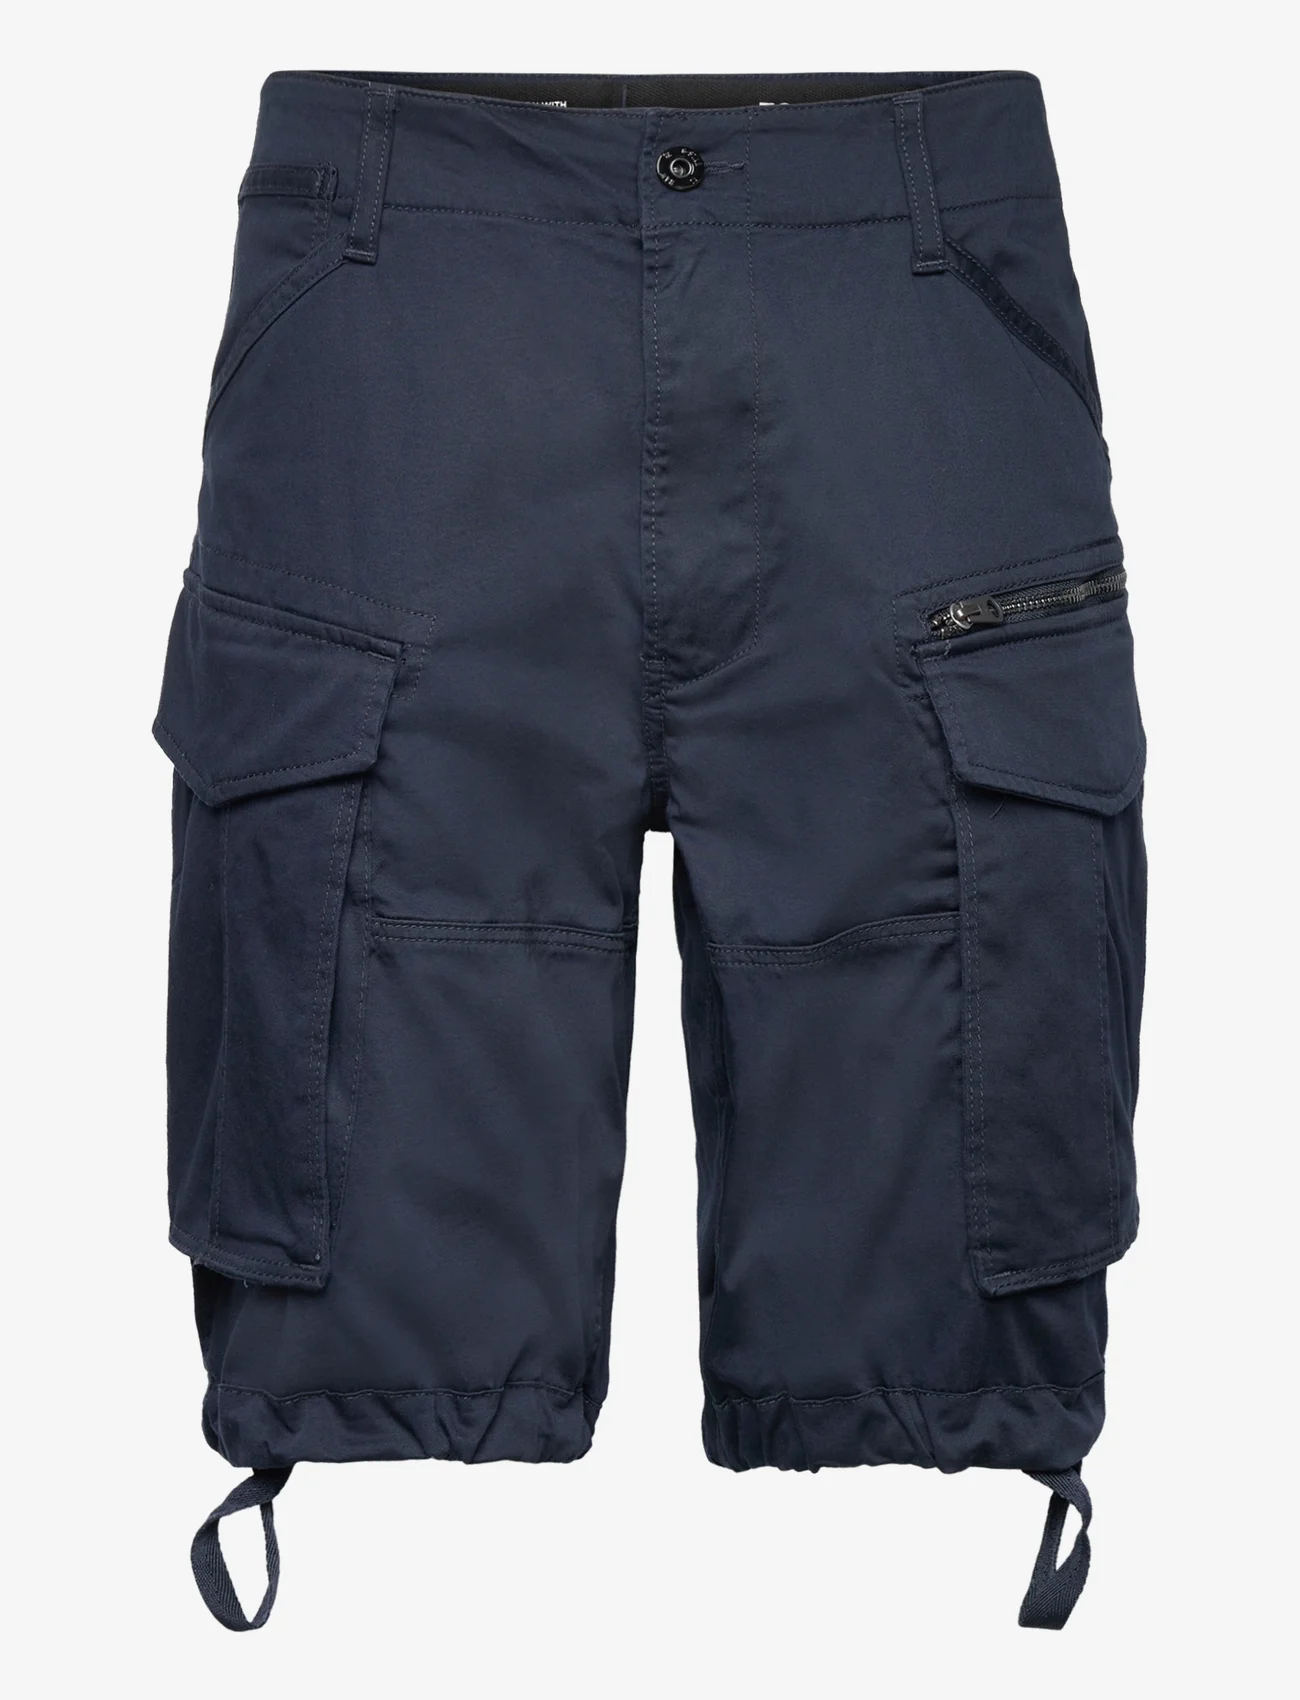 G-Star RAW - Rovic zip relaxed 1\2 - shorts - salute - 0